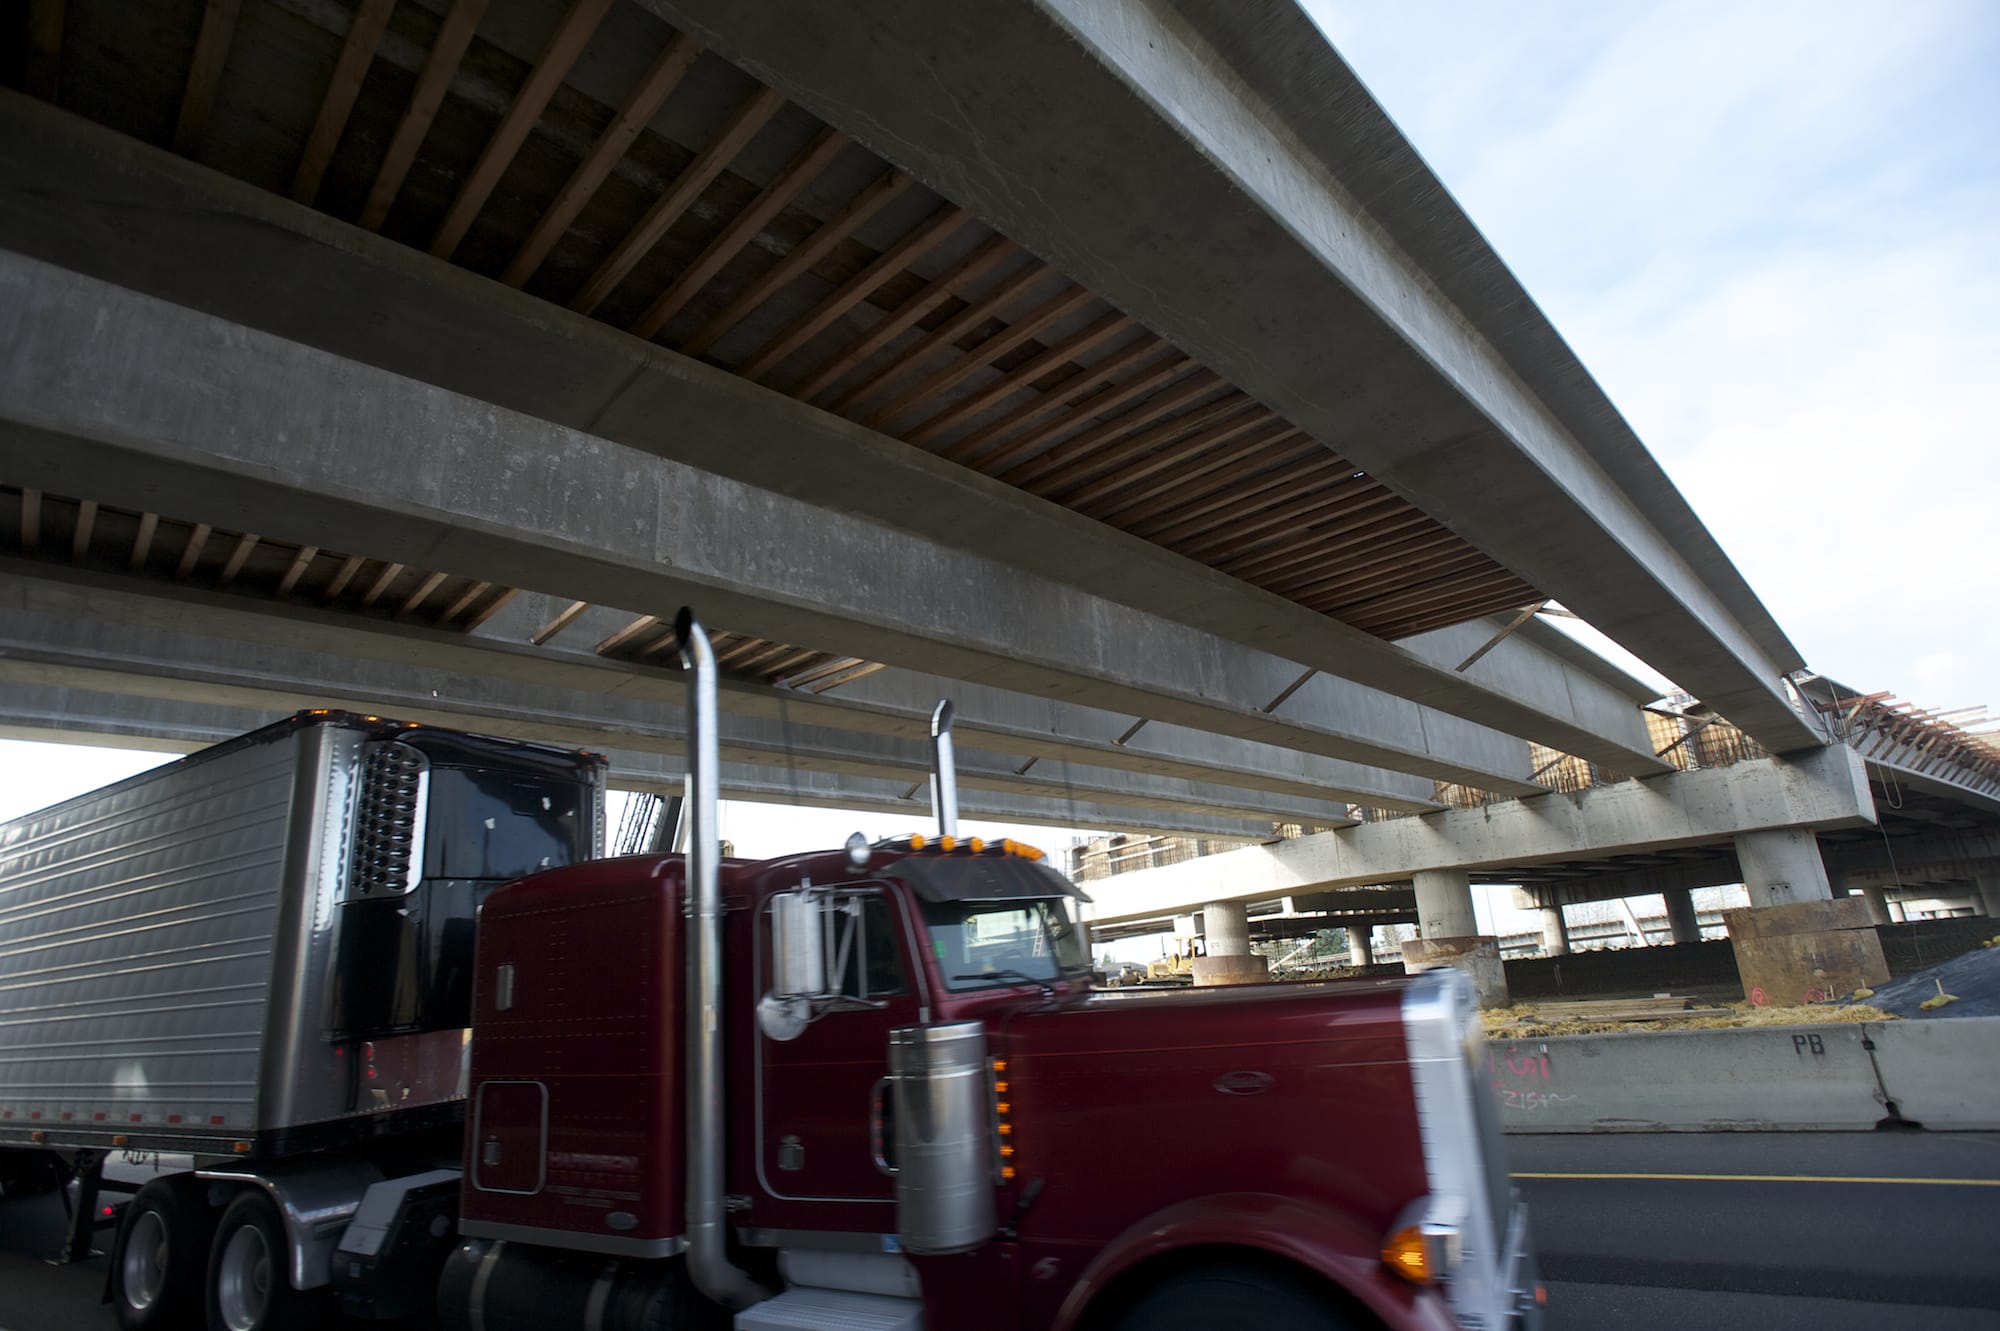 The new interchange at Northeast 139th Street will provide 16 feet, 6 inches of clearance over Interstate 205. Workers shifted the freeway 40 feet to the east and lowered it 9 feet to make that possible.